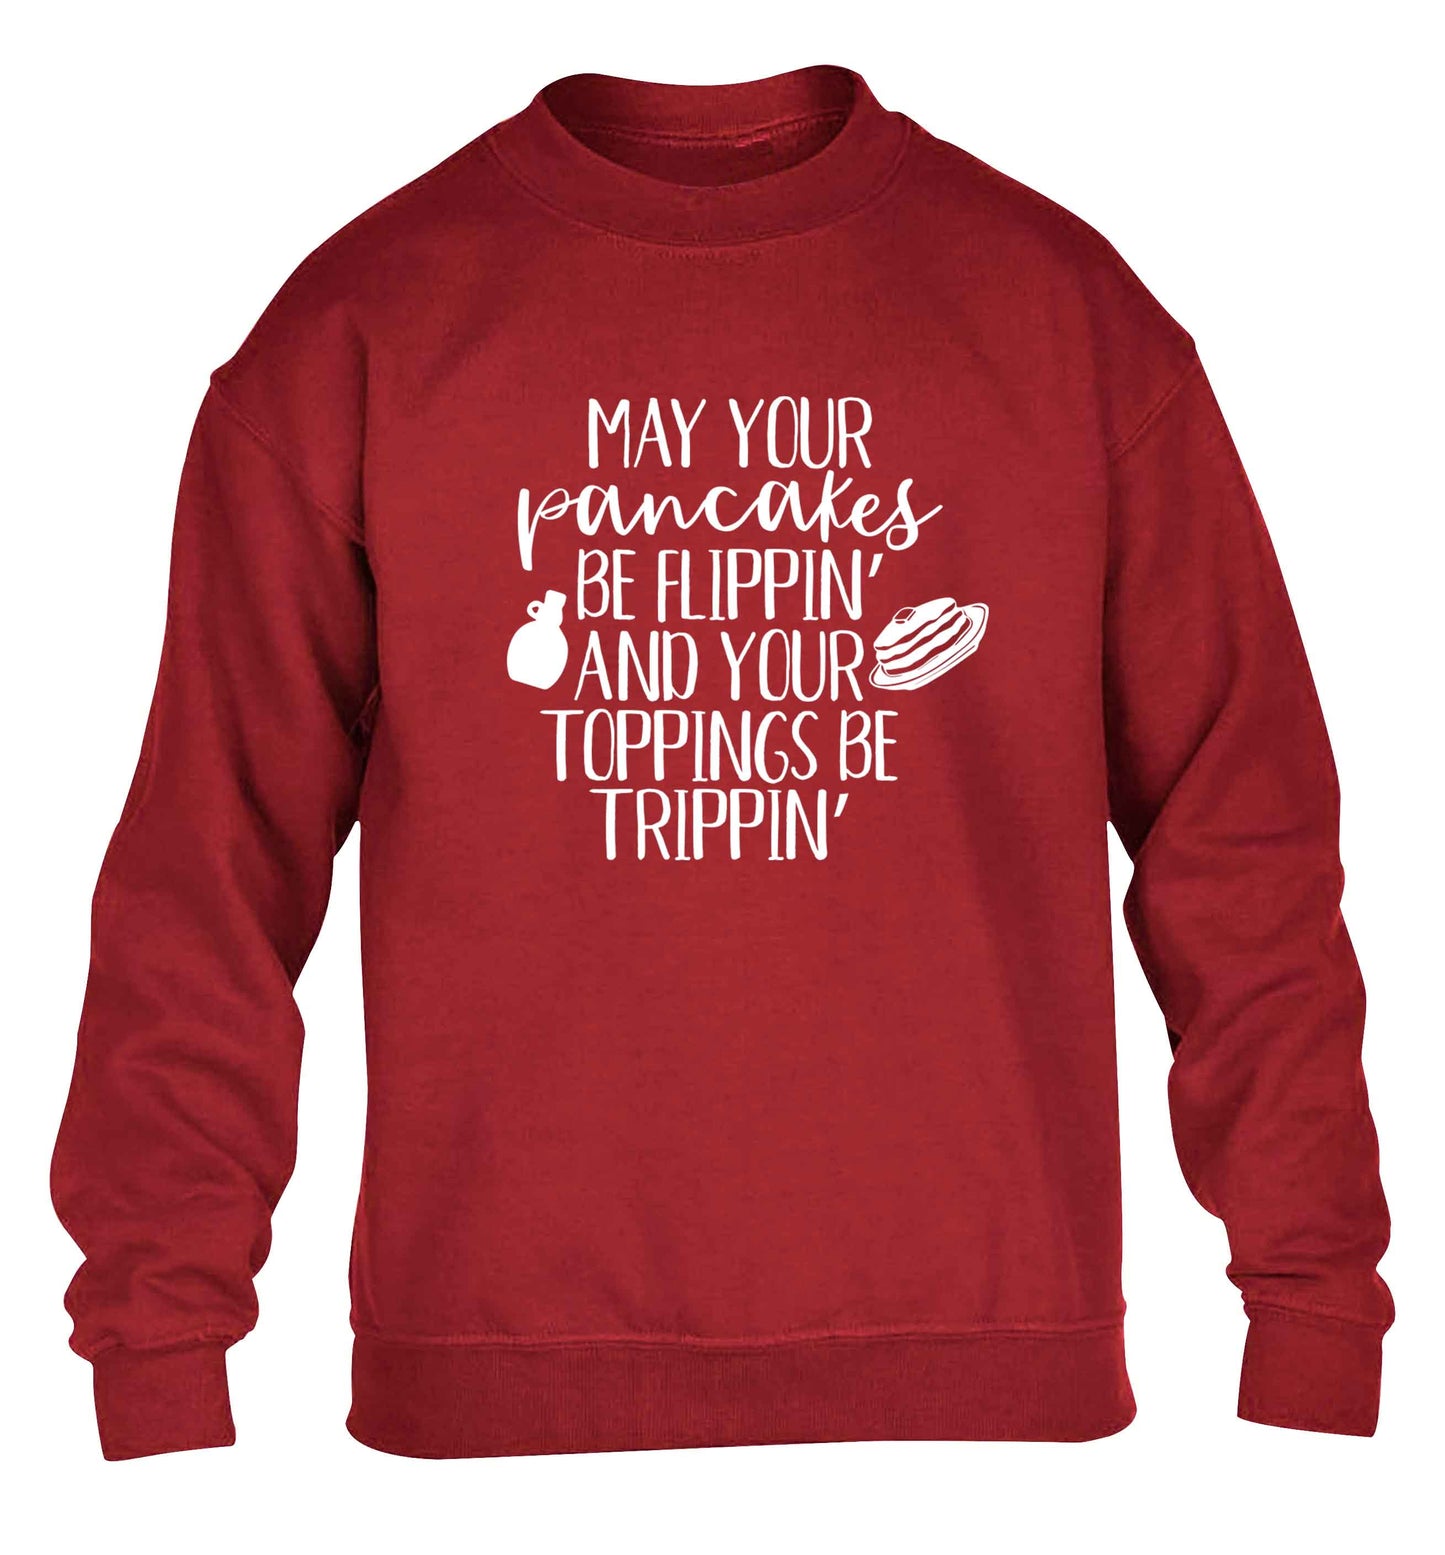 May your pancakes be flippin' and your toppings be trippin' children's grey sweater 12-13 Years